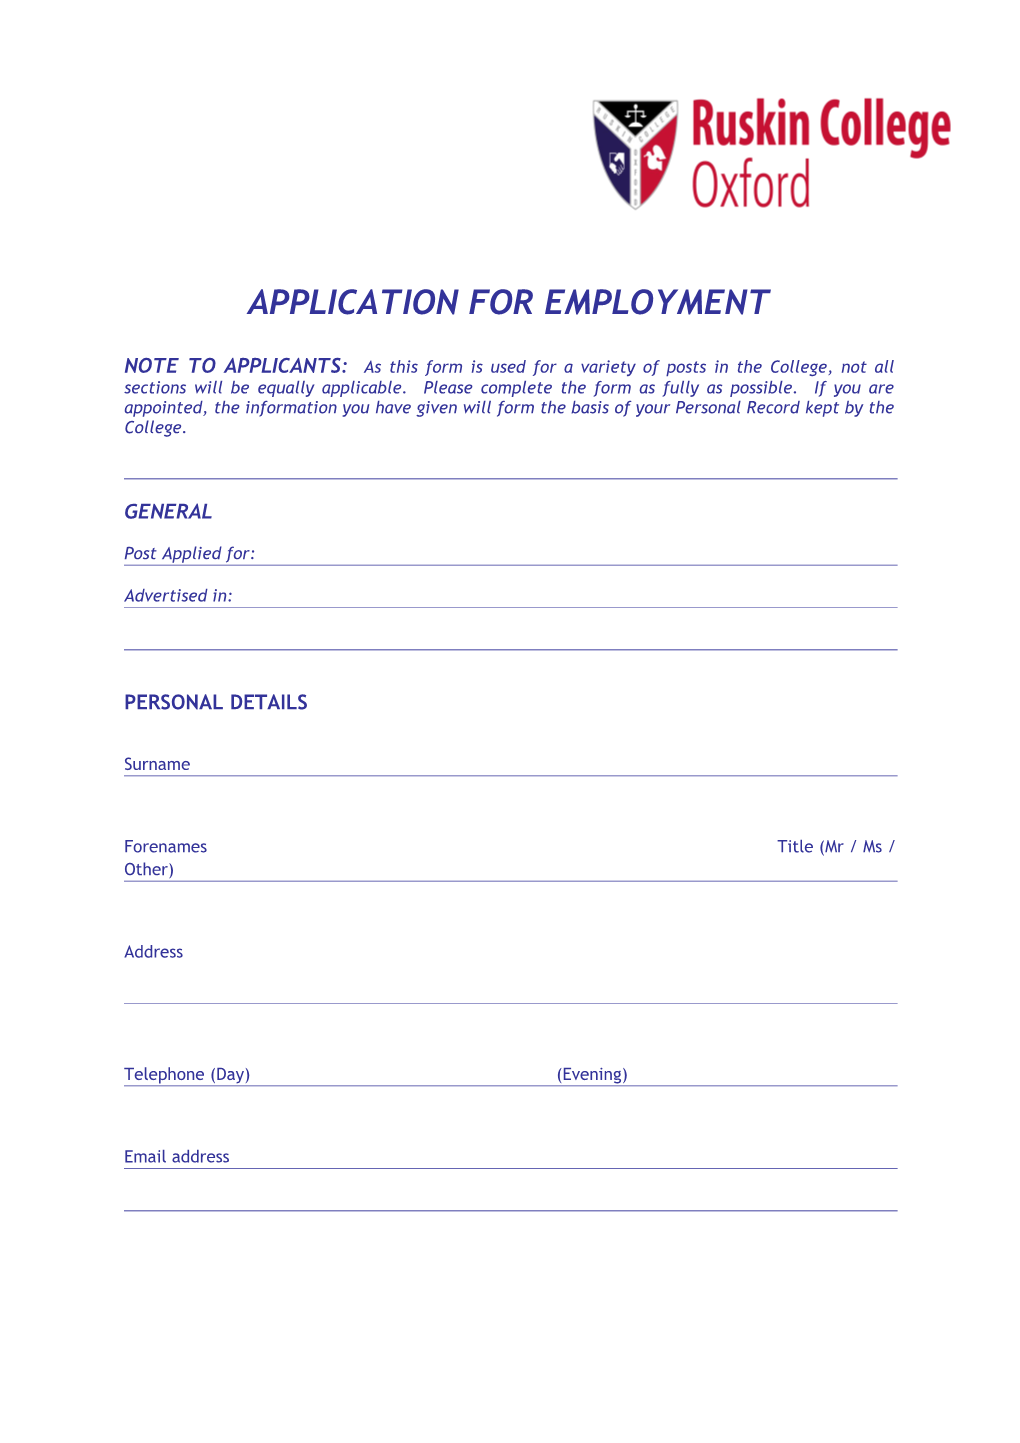 Application for Employment s115